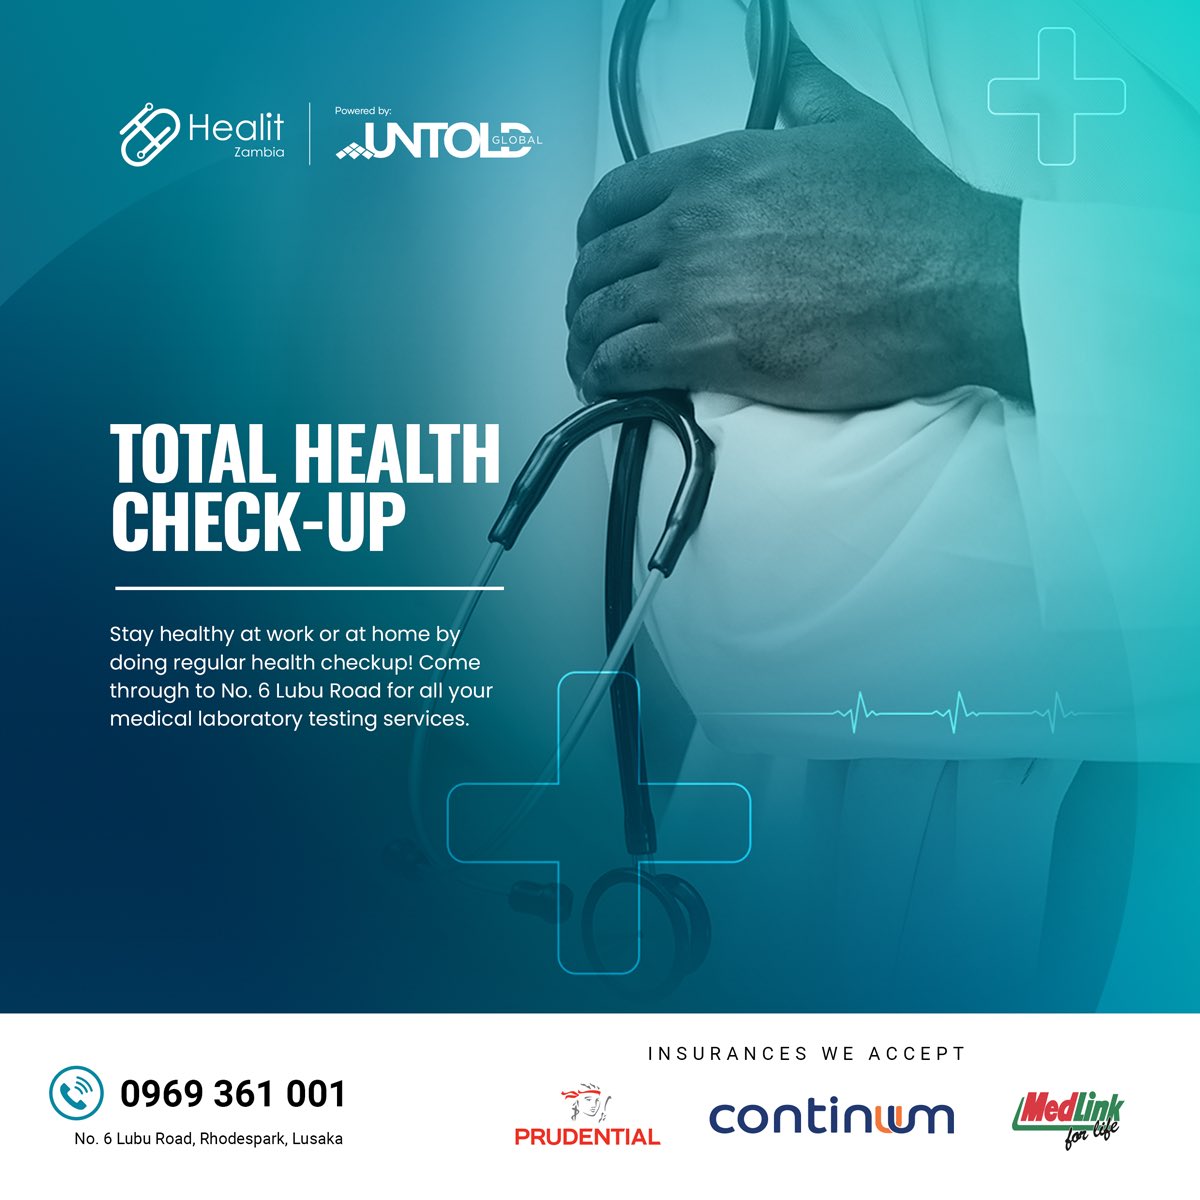 Stay healthy at work or at home by doing regular healthy checkup! Come through to No. 6 Lubu Road, call us 0969 361 001 or email info@healitzambia.com for all your medical laboratory testing services.
.
.
.
#healitzambbia #pathologyservices